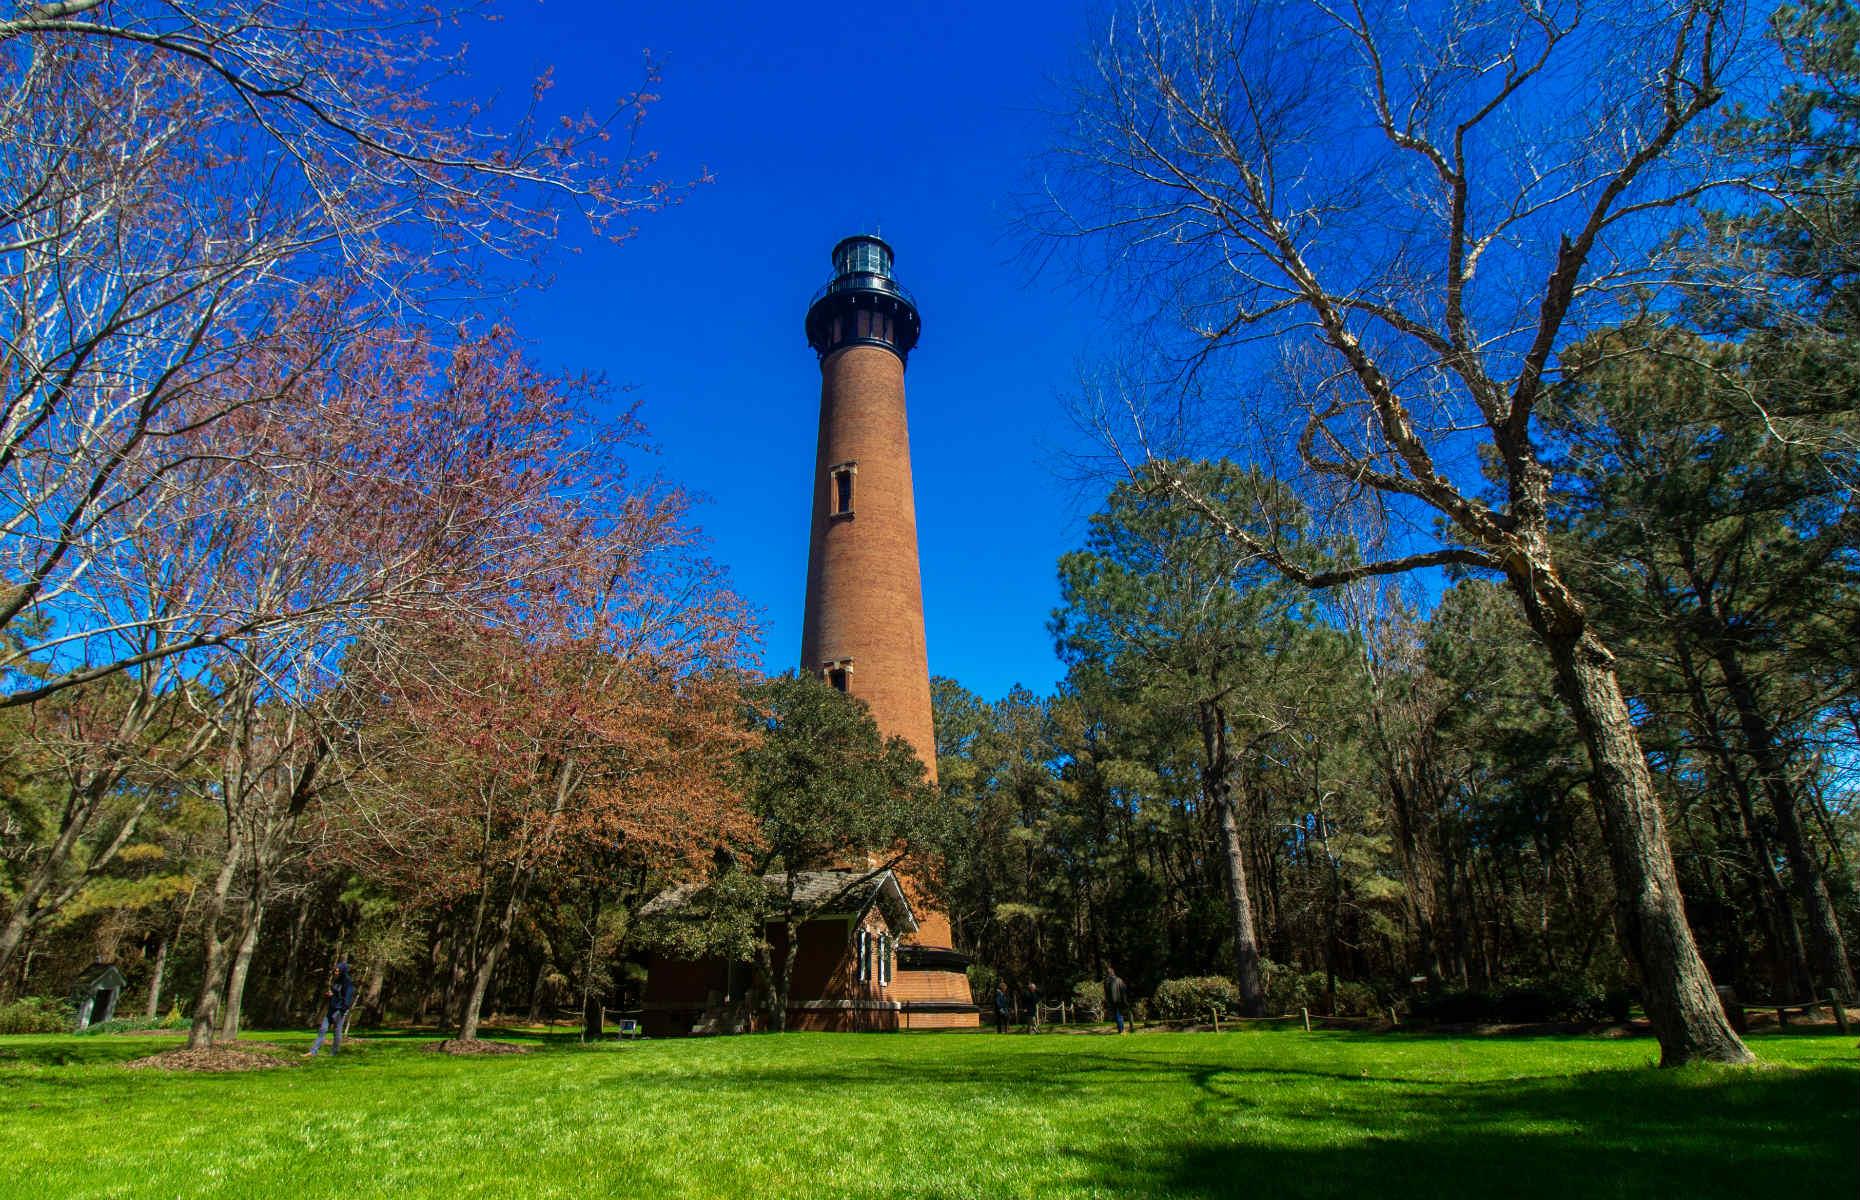 <p>First illuminated in 1875, this Gothic-inspired brick tower looks out over the northern Outer Banks in Corolla village. Inside, there’s a 214-step spiral staircase to the top, which offers dazzling views of Currituck Sound, the Atlantic Ocean and the Currituck Outer Banks. </p>